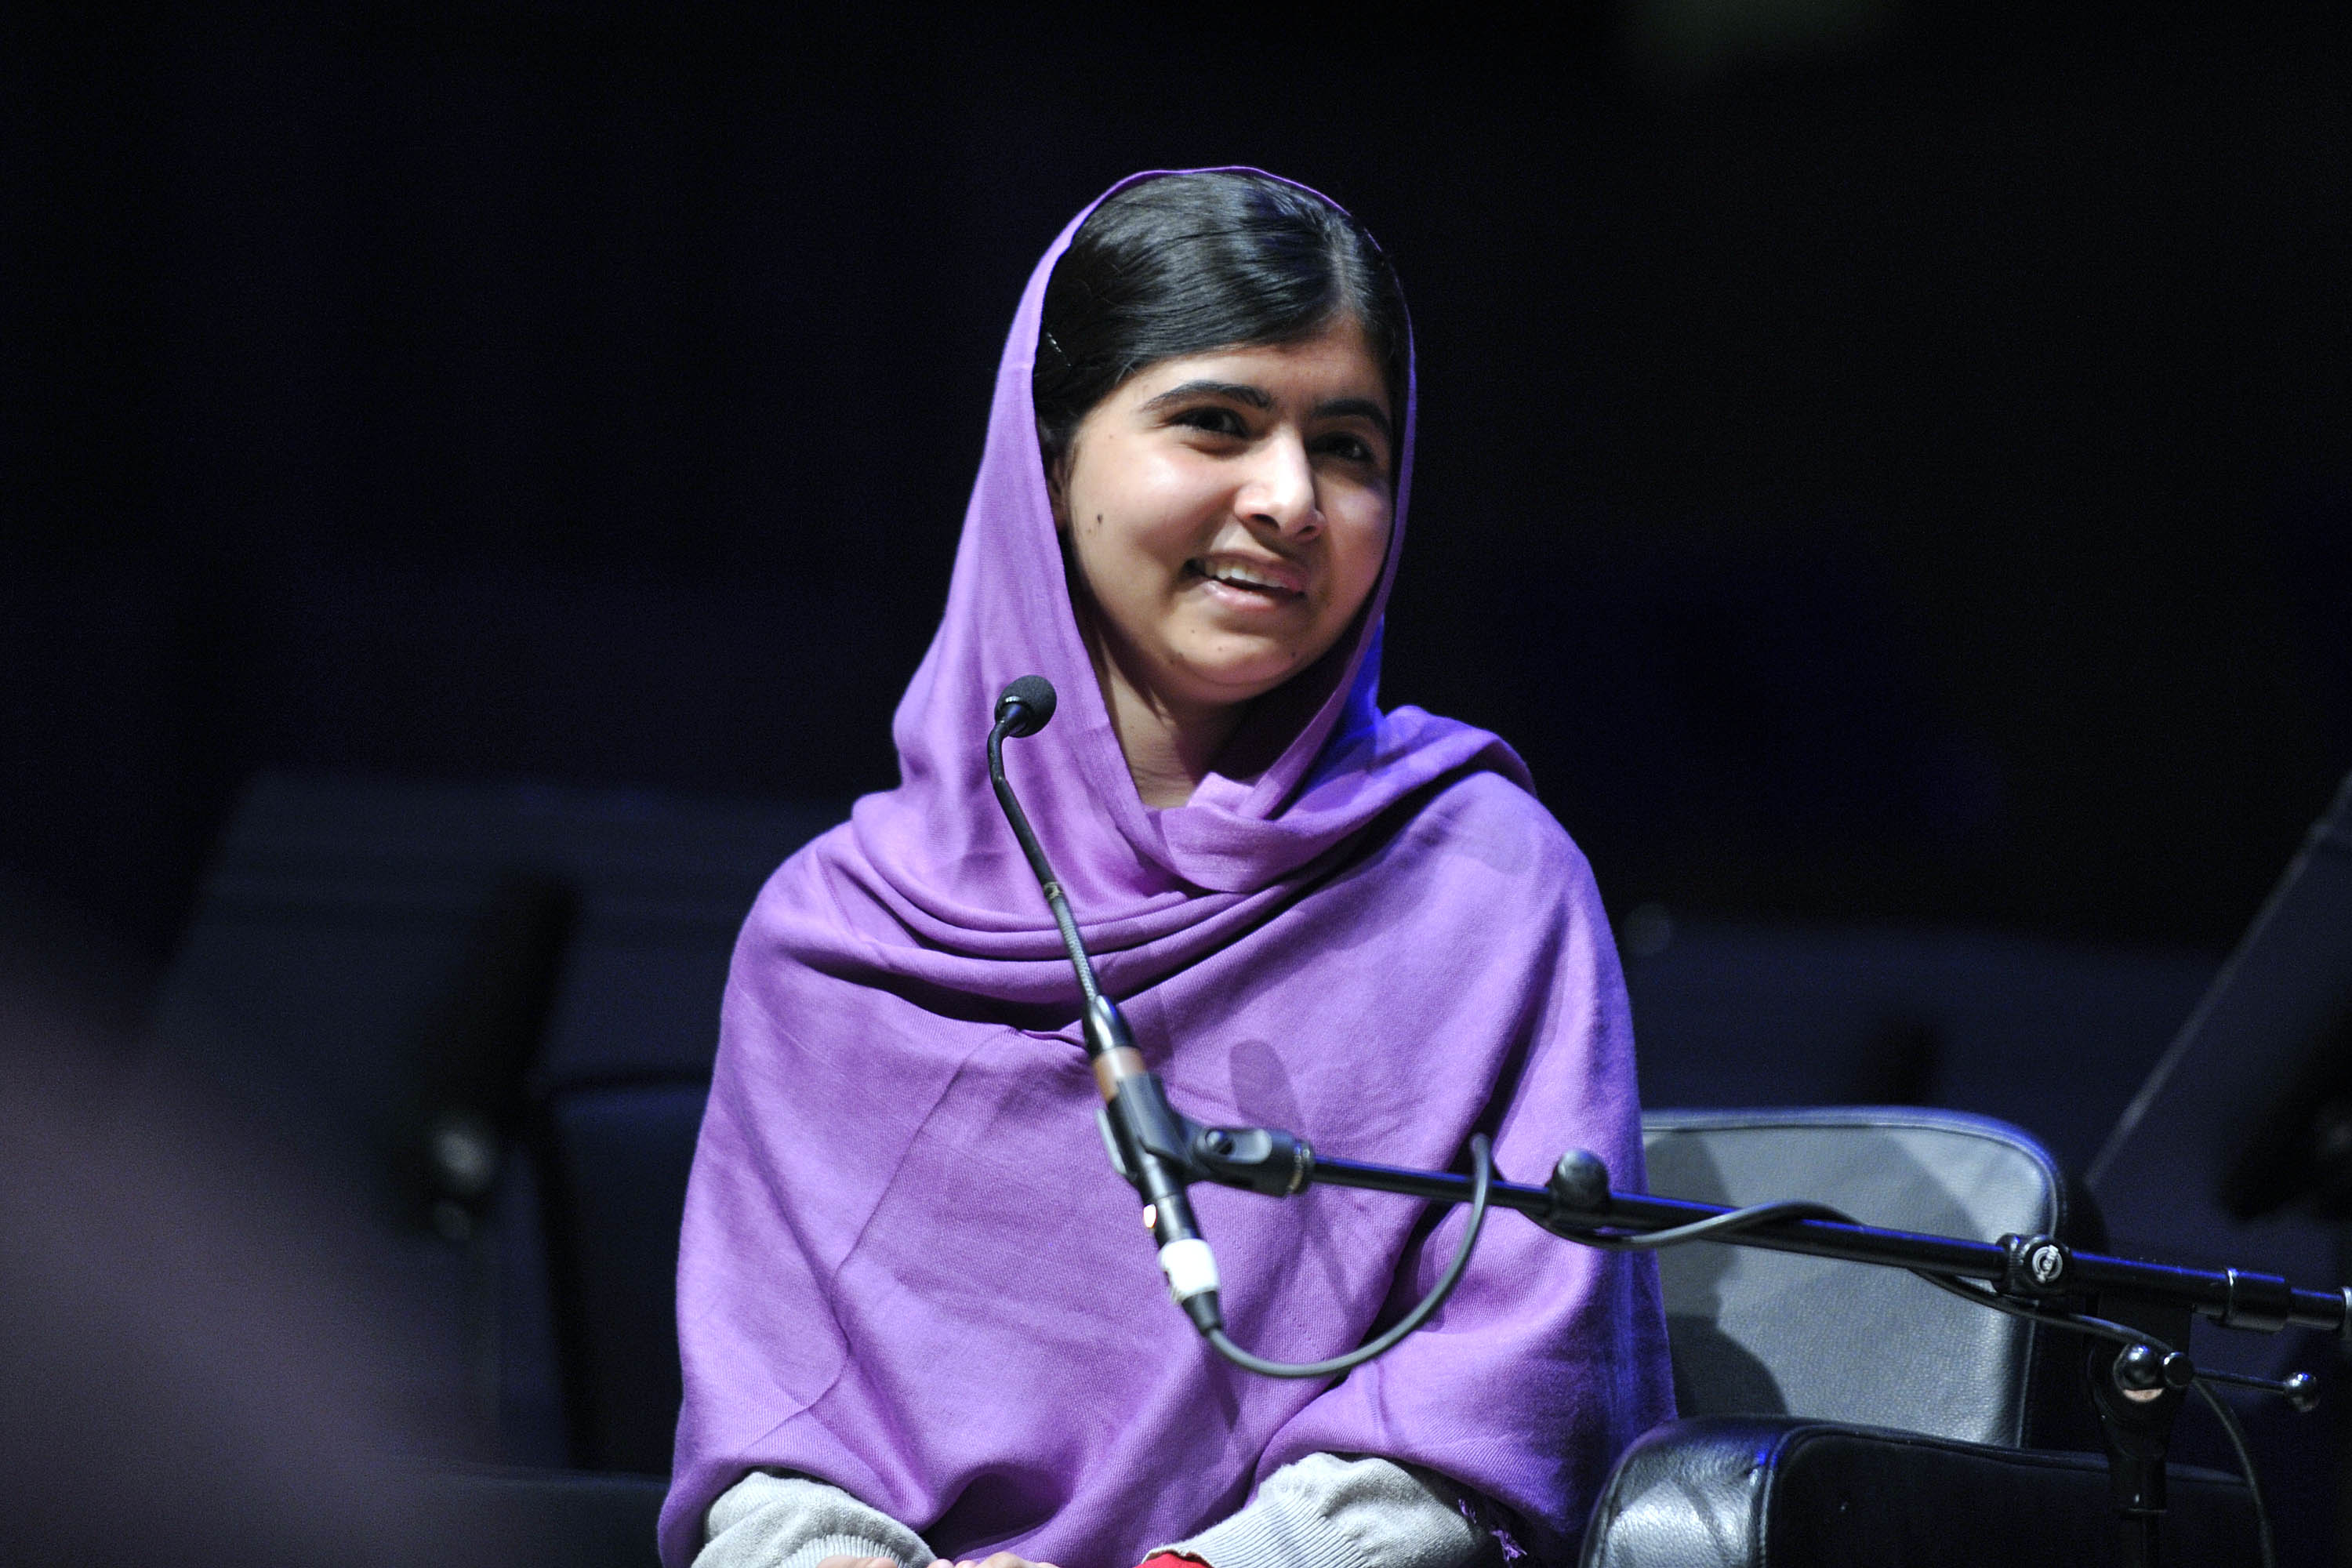 Malala writes a beautiful letter to abducted Chibok schoolgirls